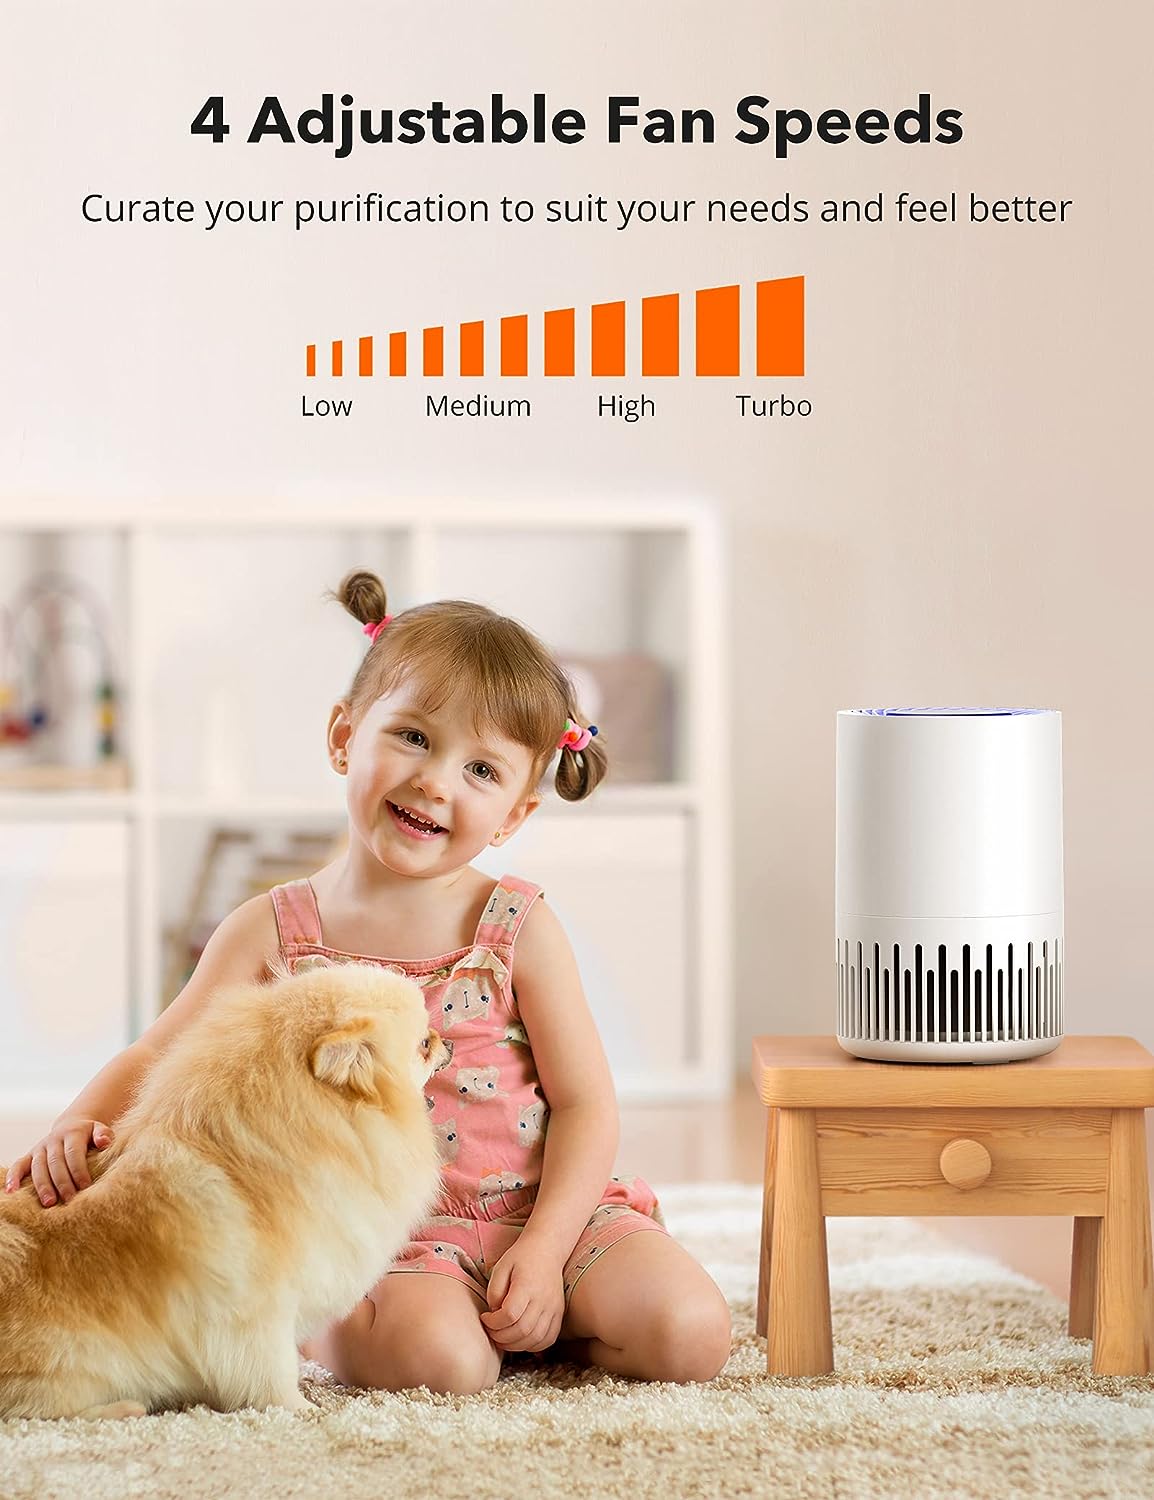 HEPA Air Purifier for Bedroom, Portable Air Cleaner with H13 HEPA Filter, 4 Fan Speeds